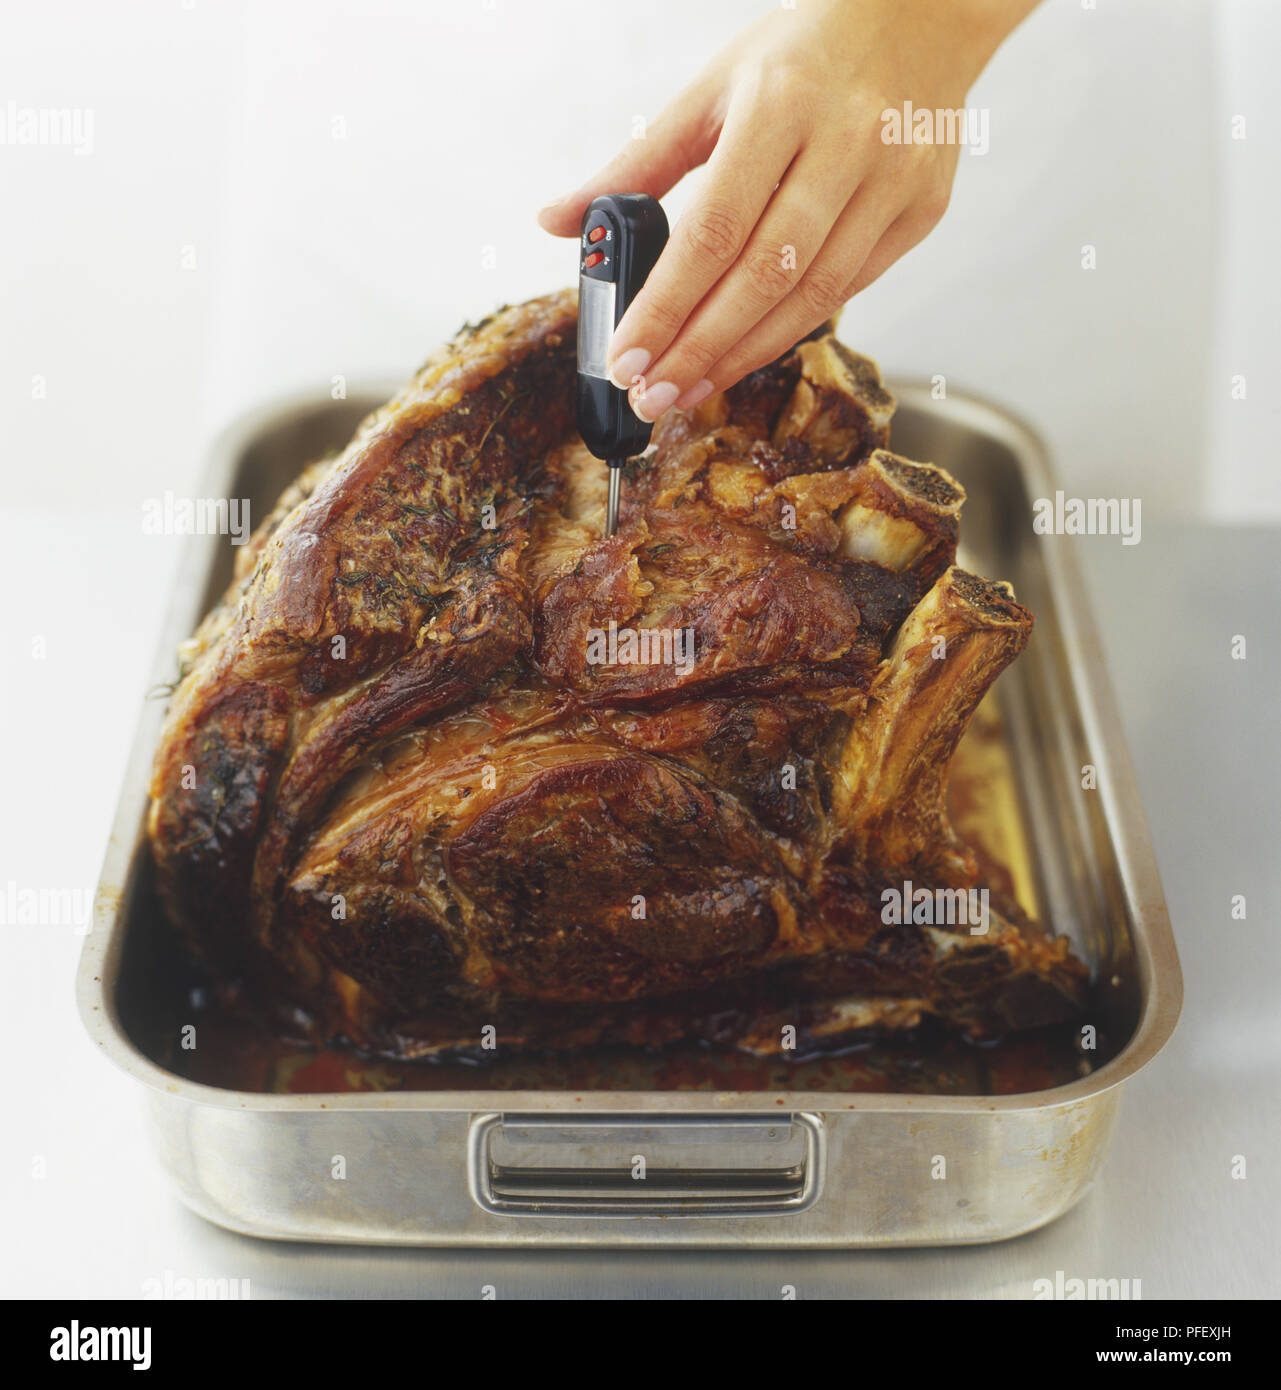 https://c8.alamy.com/comp/PFEXJH/using-a-meat-thermometer-to-measure-internal-temperature-of-roasted-beef-joint-PFEXJH.jpg